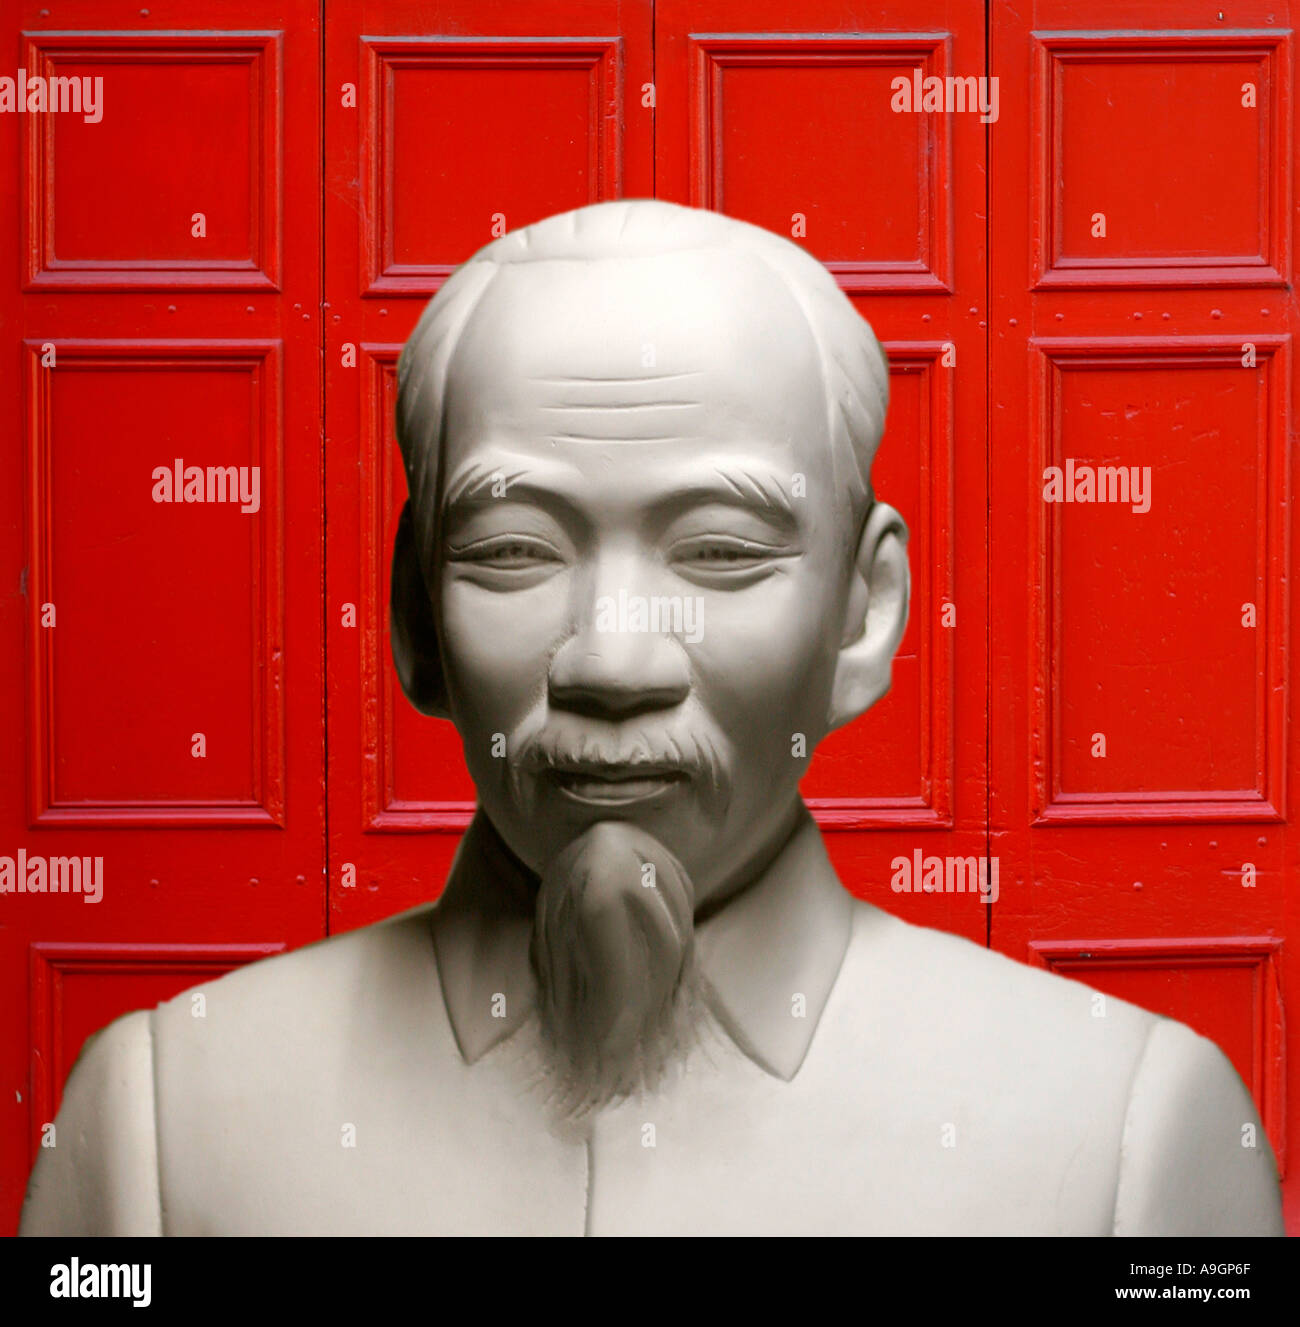 Classical sculpture of Chinese man with red door as a symbol of  Chinese power. Stock Photo